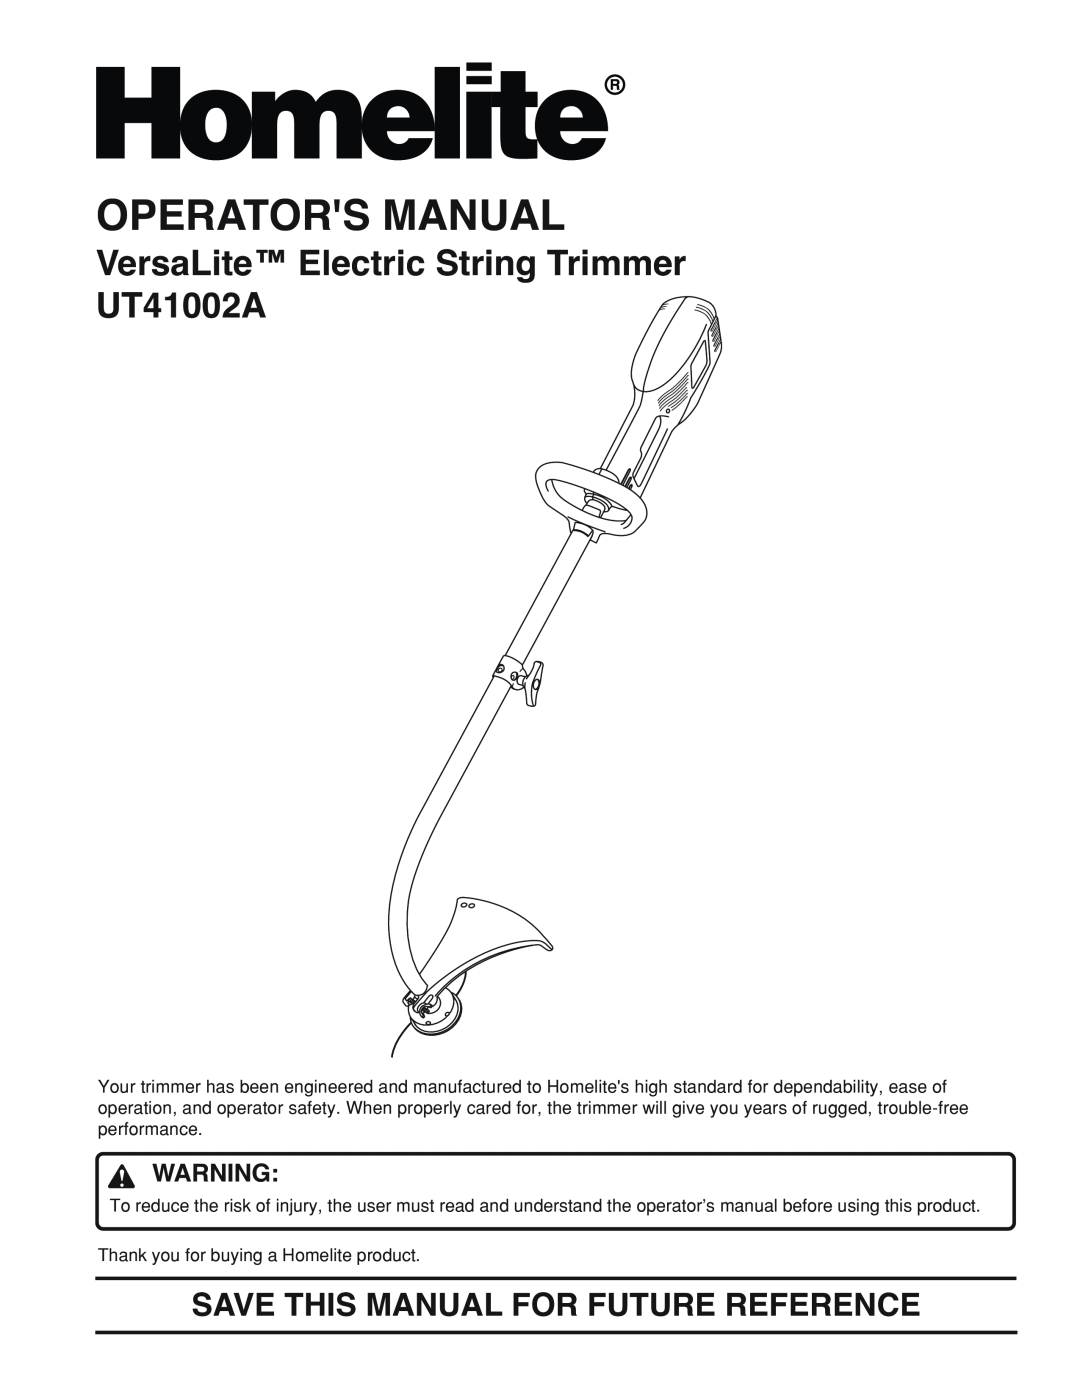 Homelite manual Operators Manual, VersaLite Electric String Trimmer UT41002A, Save This Manual For Future Reference 